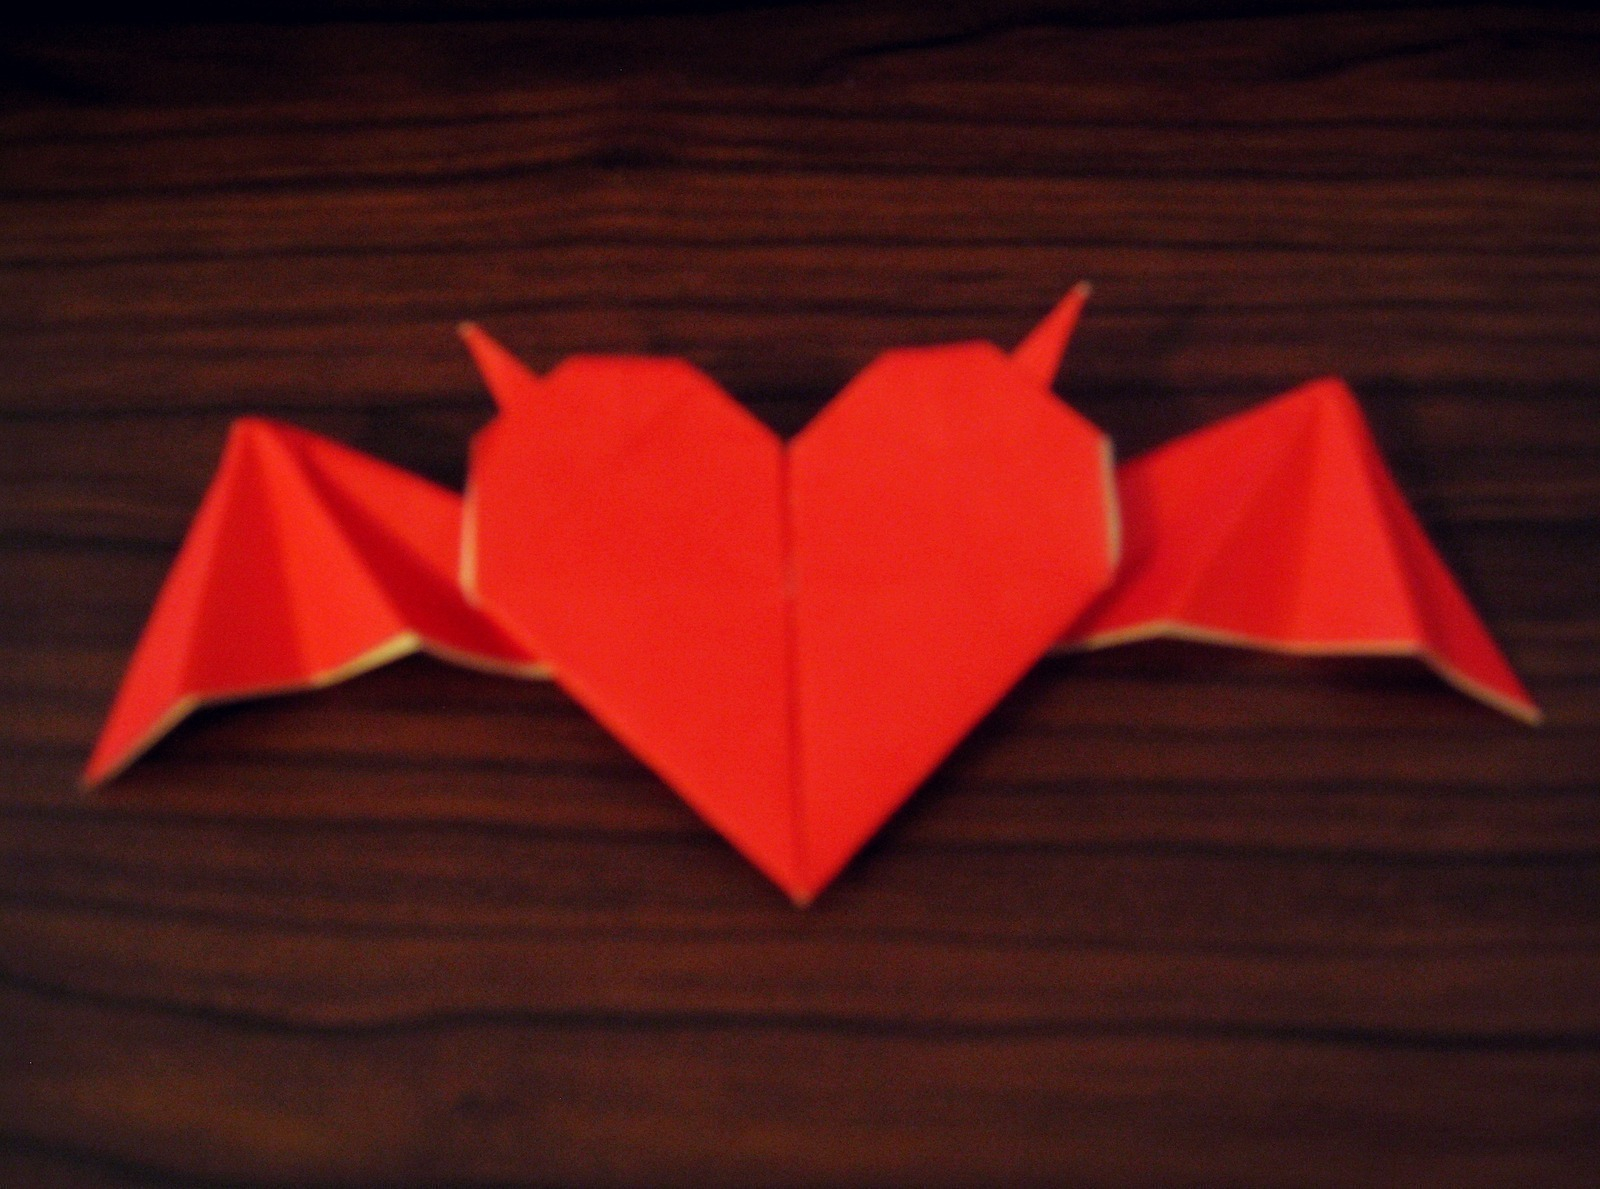 Origami Heart Cube Origami Heart With Horns And Bat Wings How To Fold An Origami